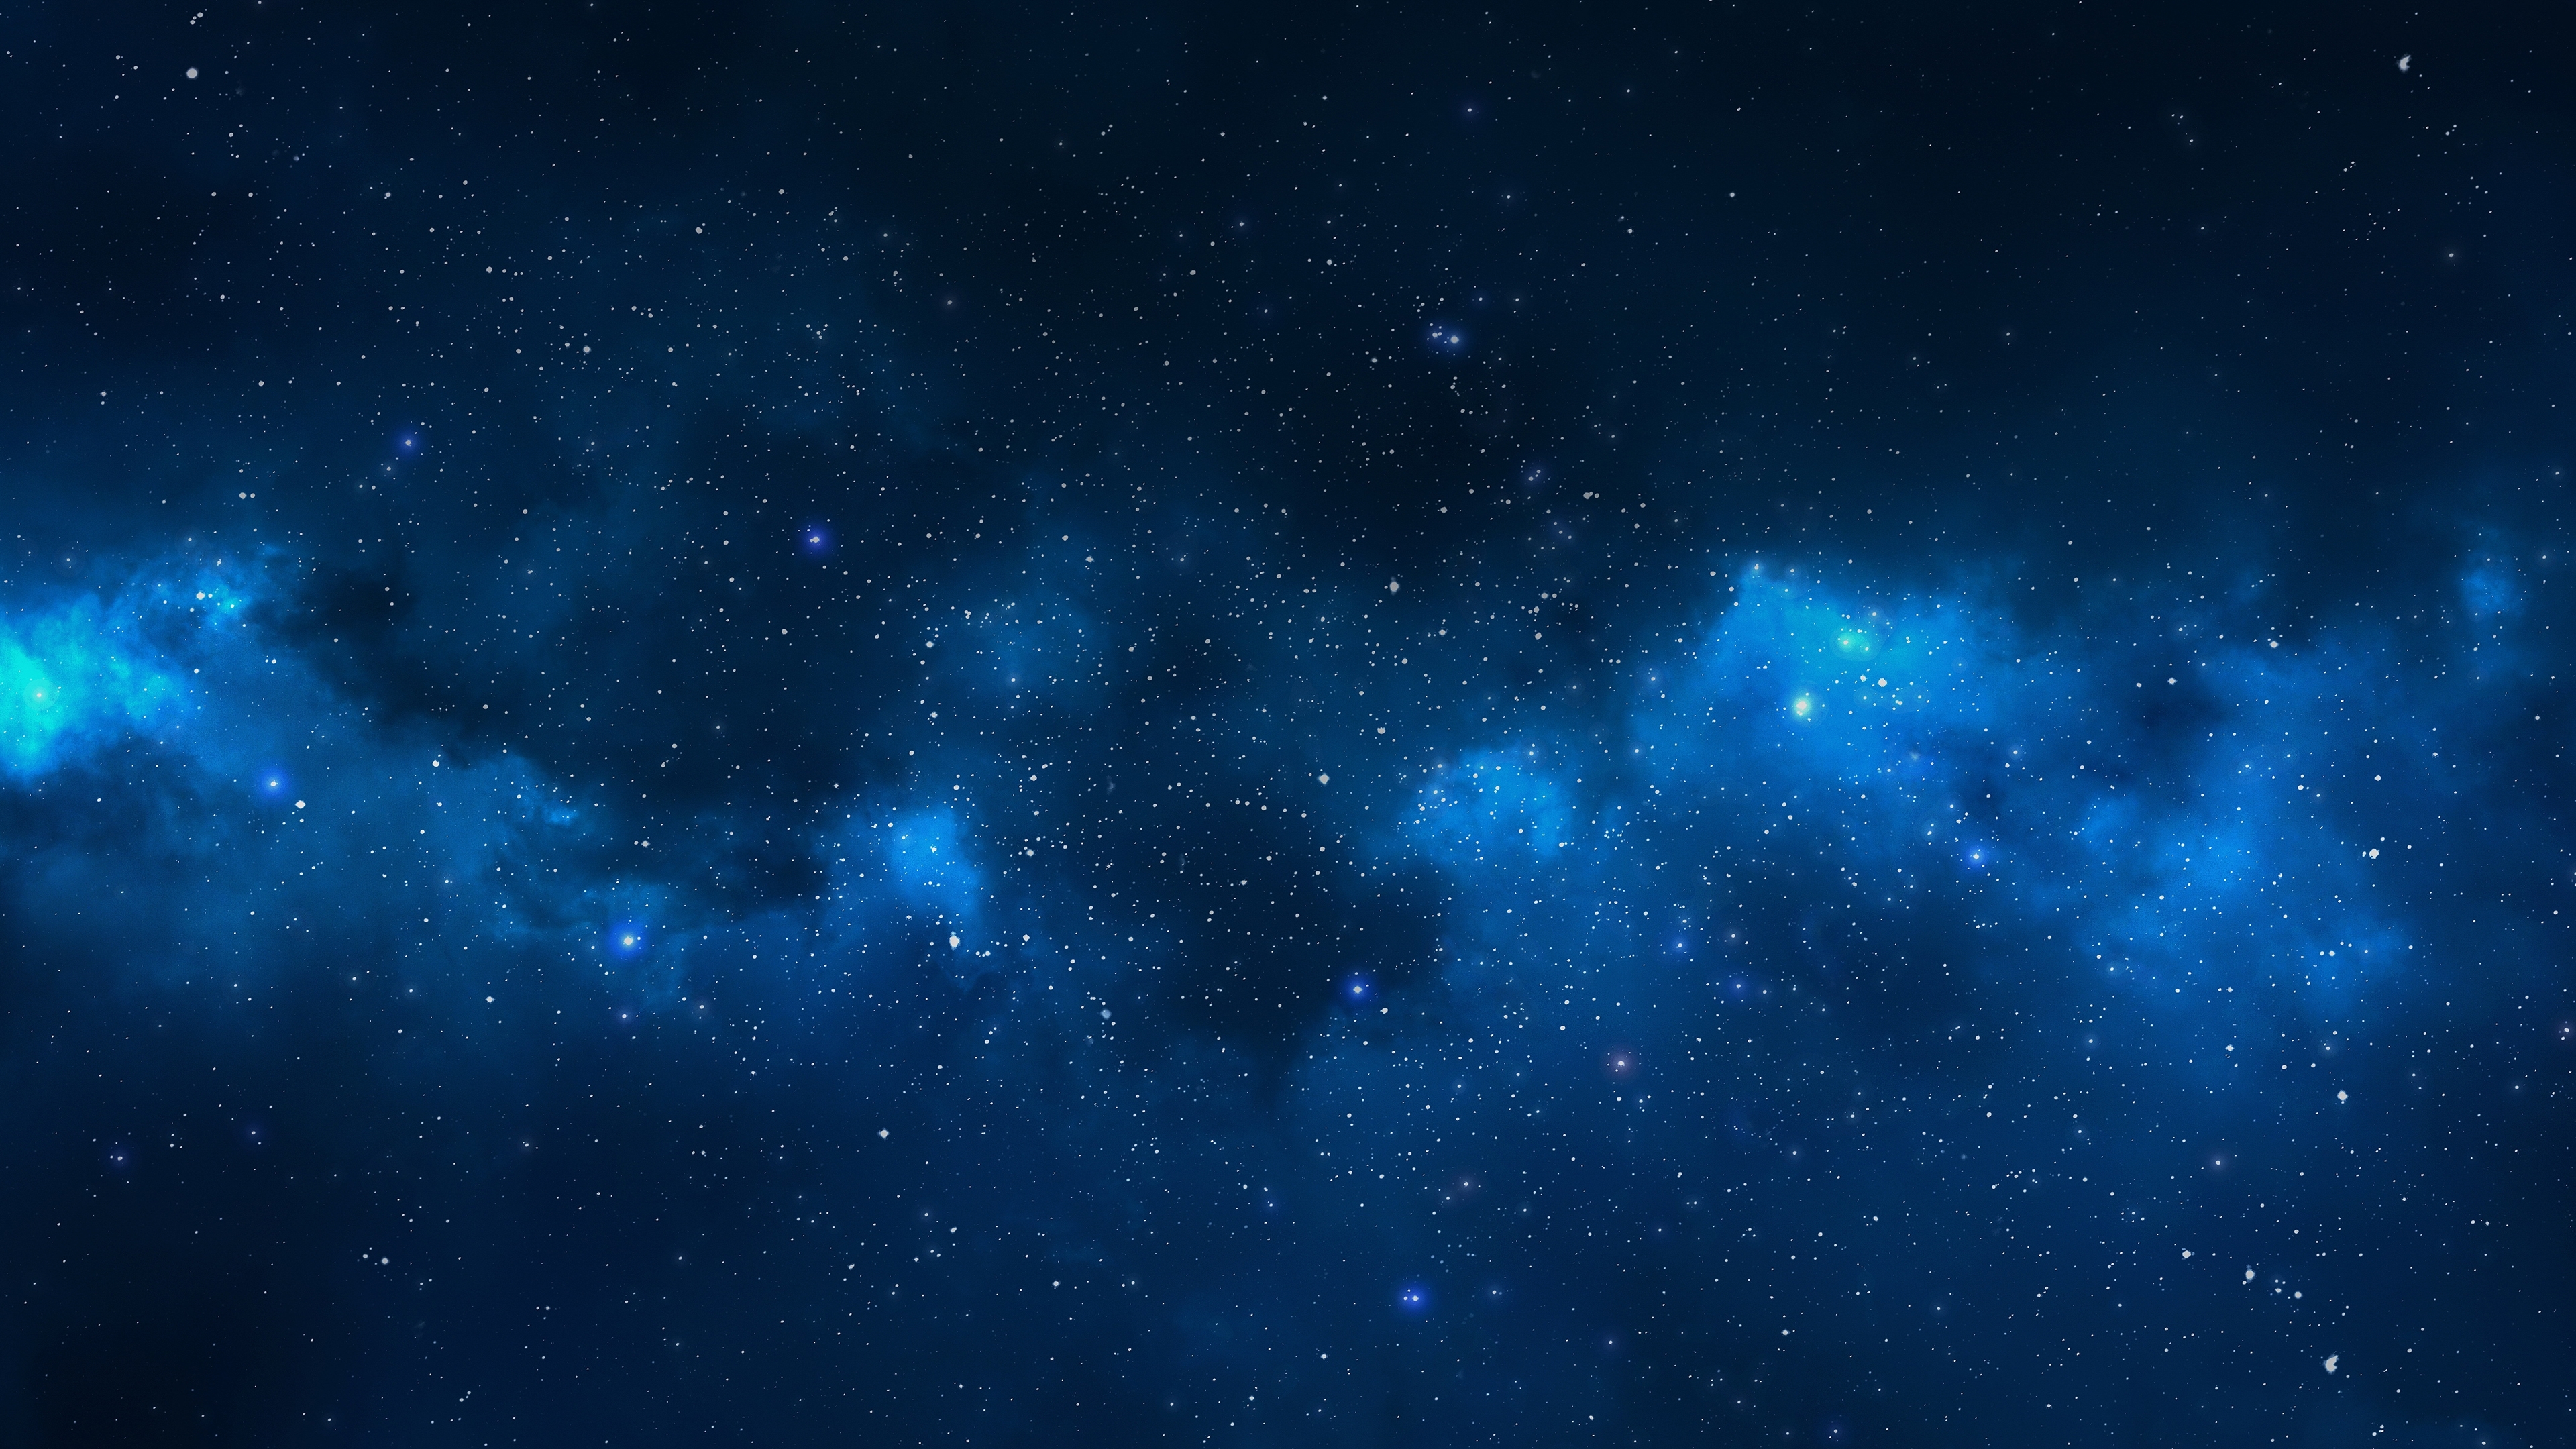 10 New 4K Galaxy Wallpaper FULL HD 1080p For PC Background